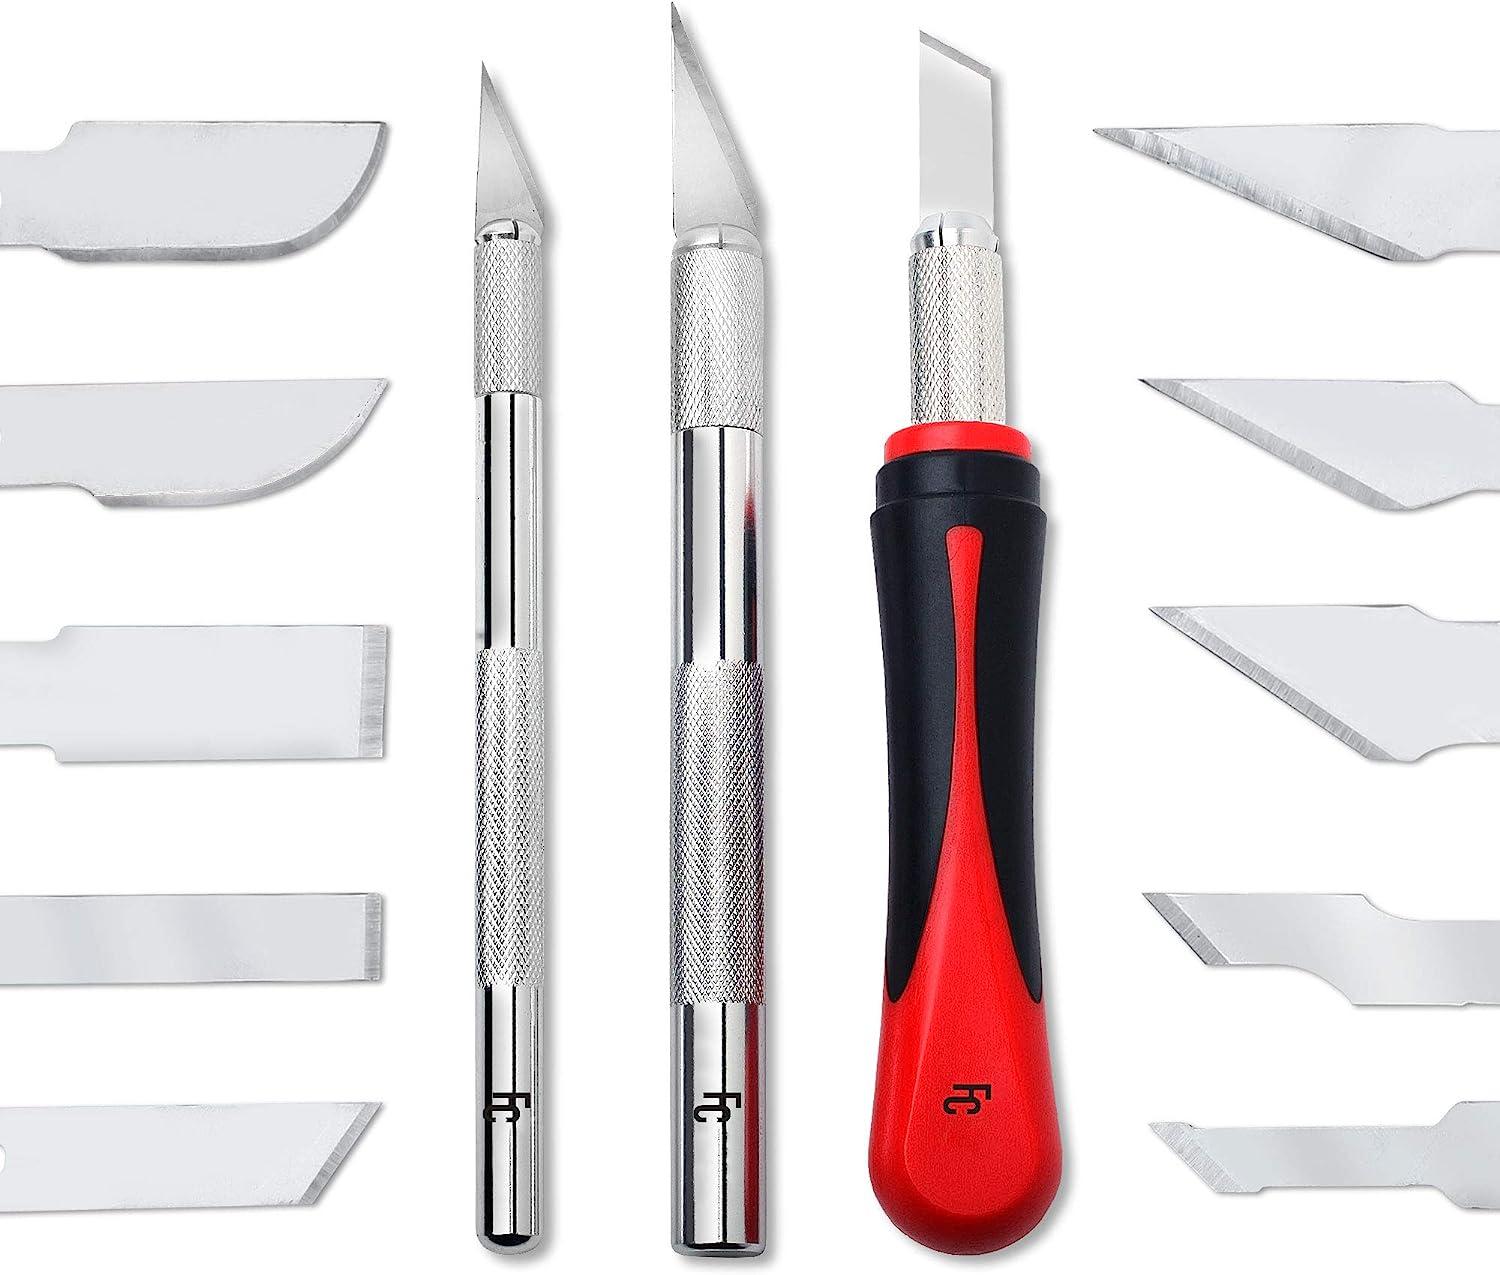 Fancii Precision Craft Knife Set 16 Pieces - Professional Razor Sharp  Knives for Art, Hobby, Scrapbooking and Sculpture Includes Stencil, Fine  Point, Scoring, Chiseling Blades